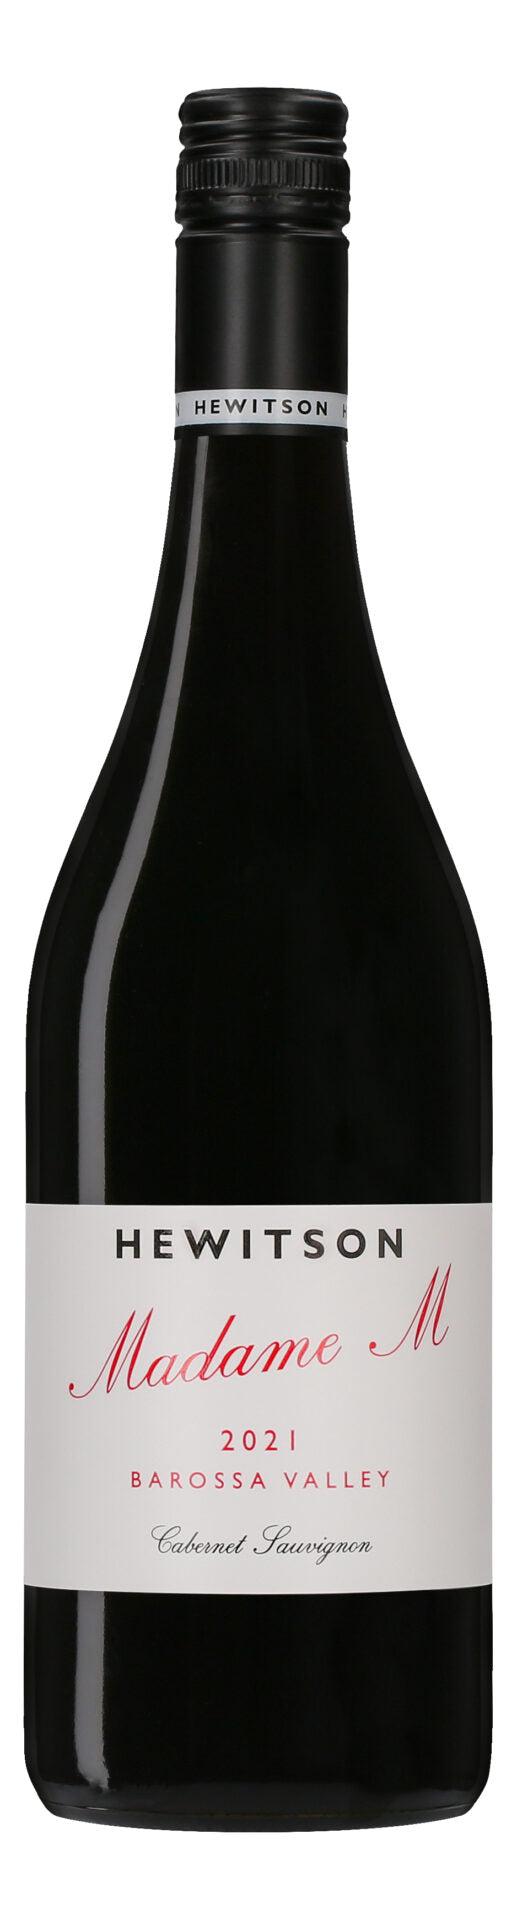 A wine product picture of Hewitson Madame M Cabernet Sauvignon}